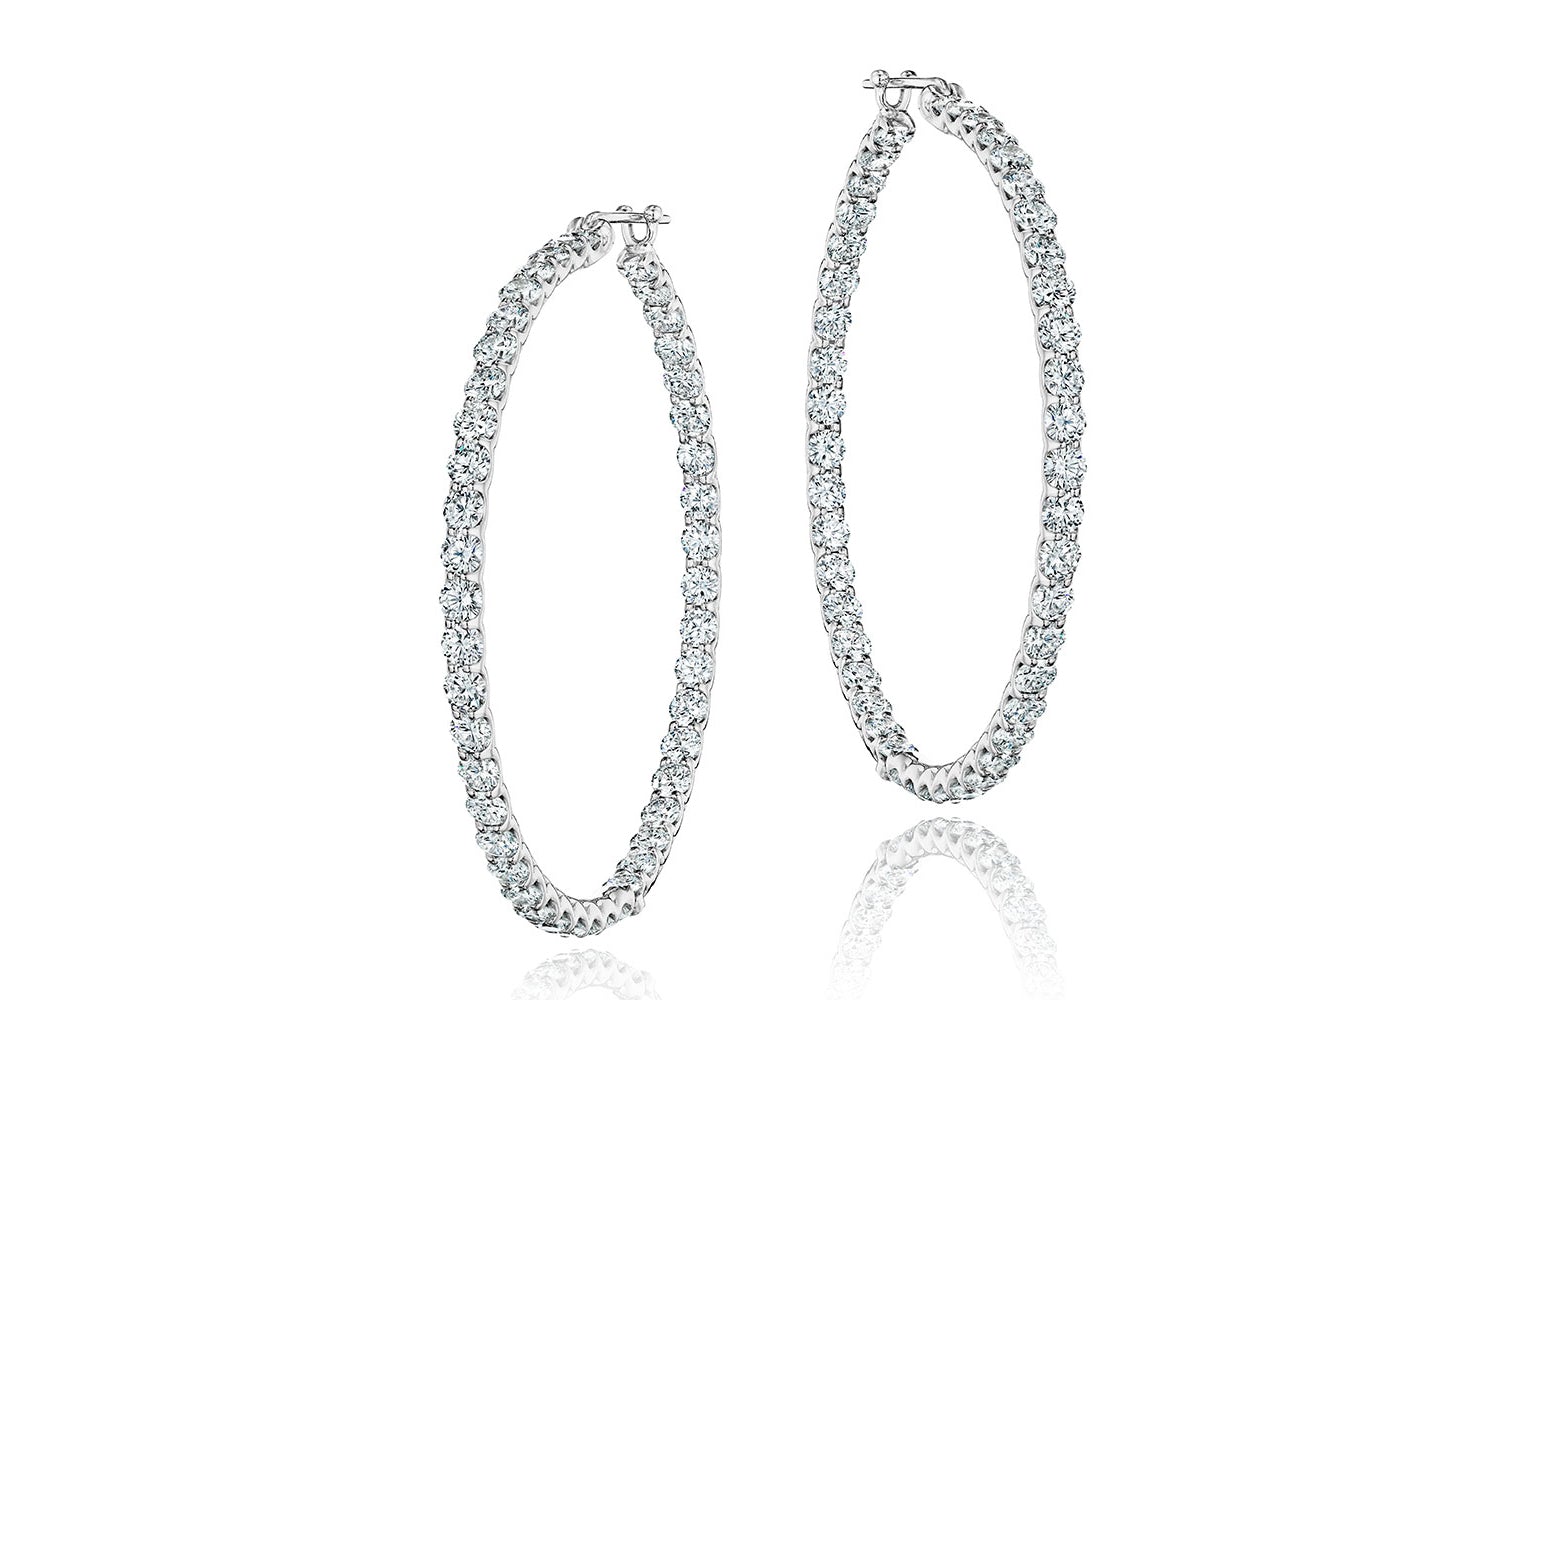 Platinum and diamond hoop earrings made in Chicago by jeweler Lester Lampert.